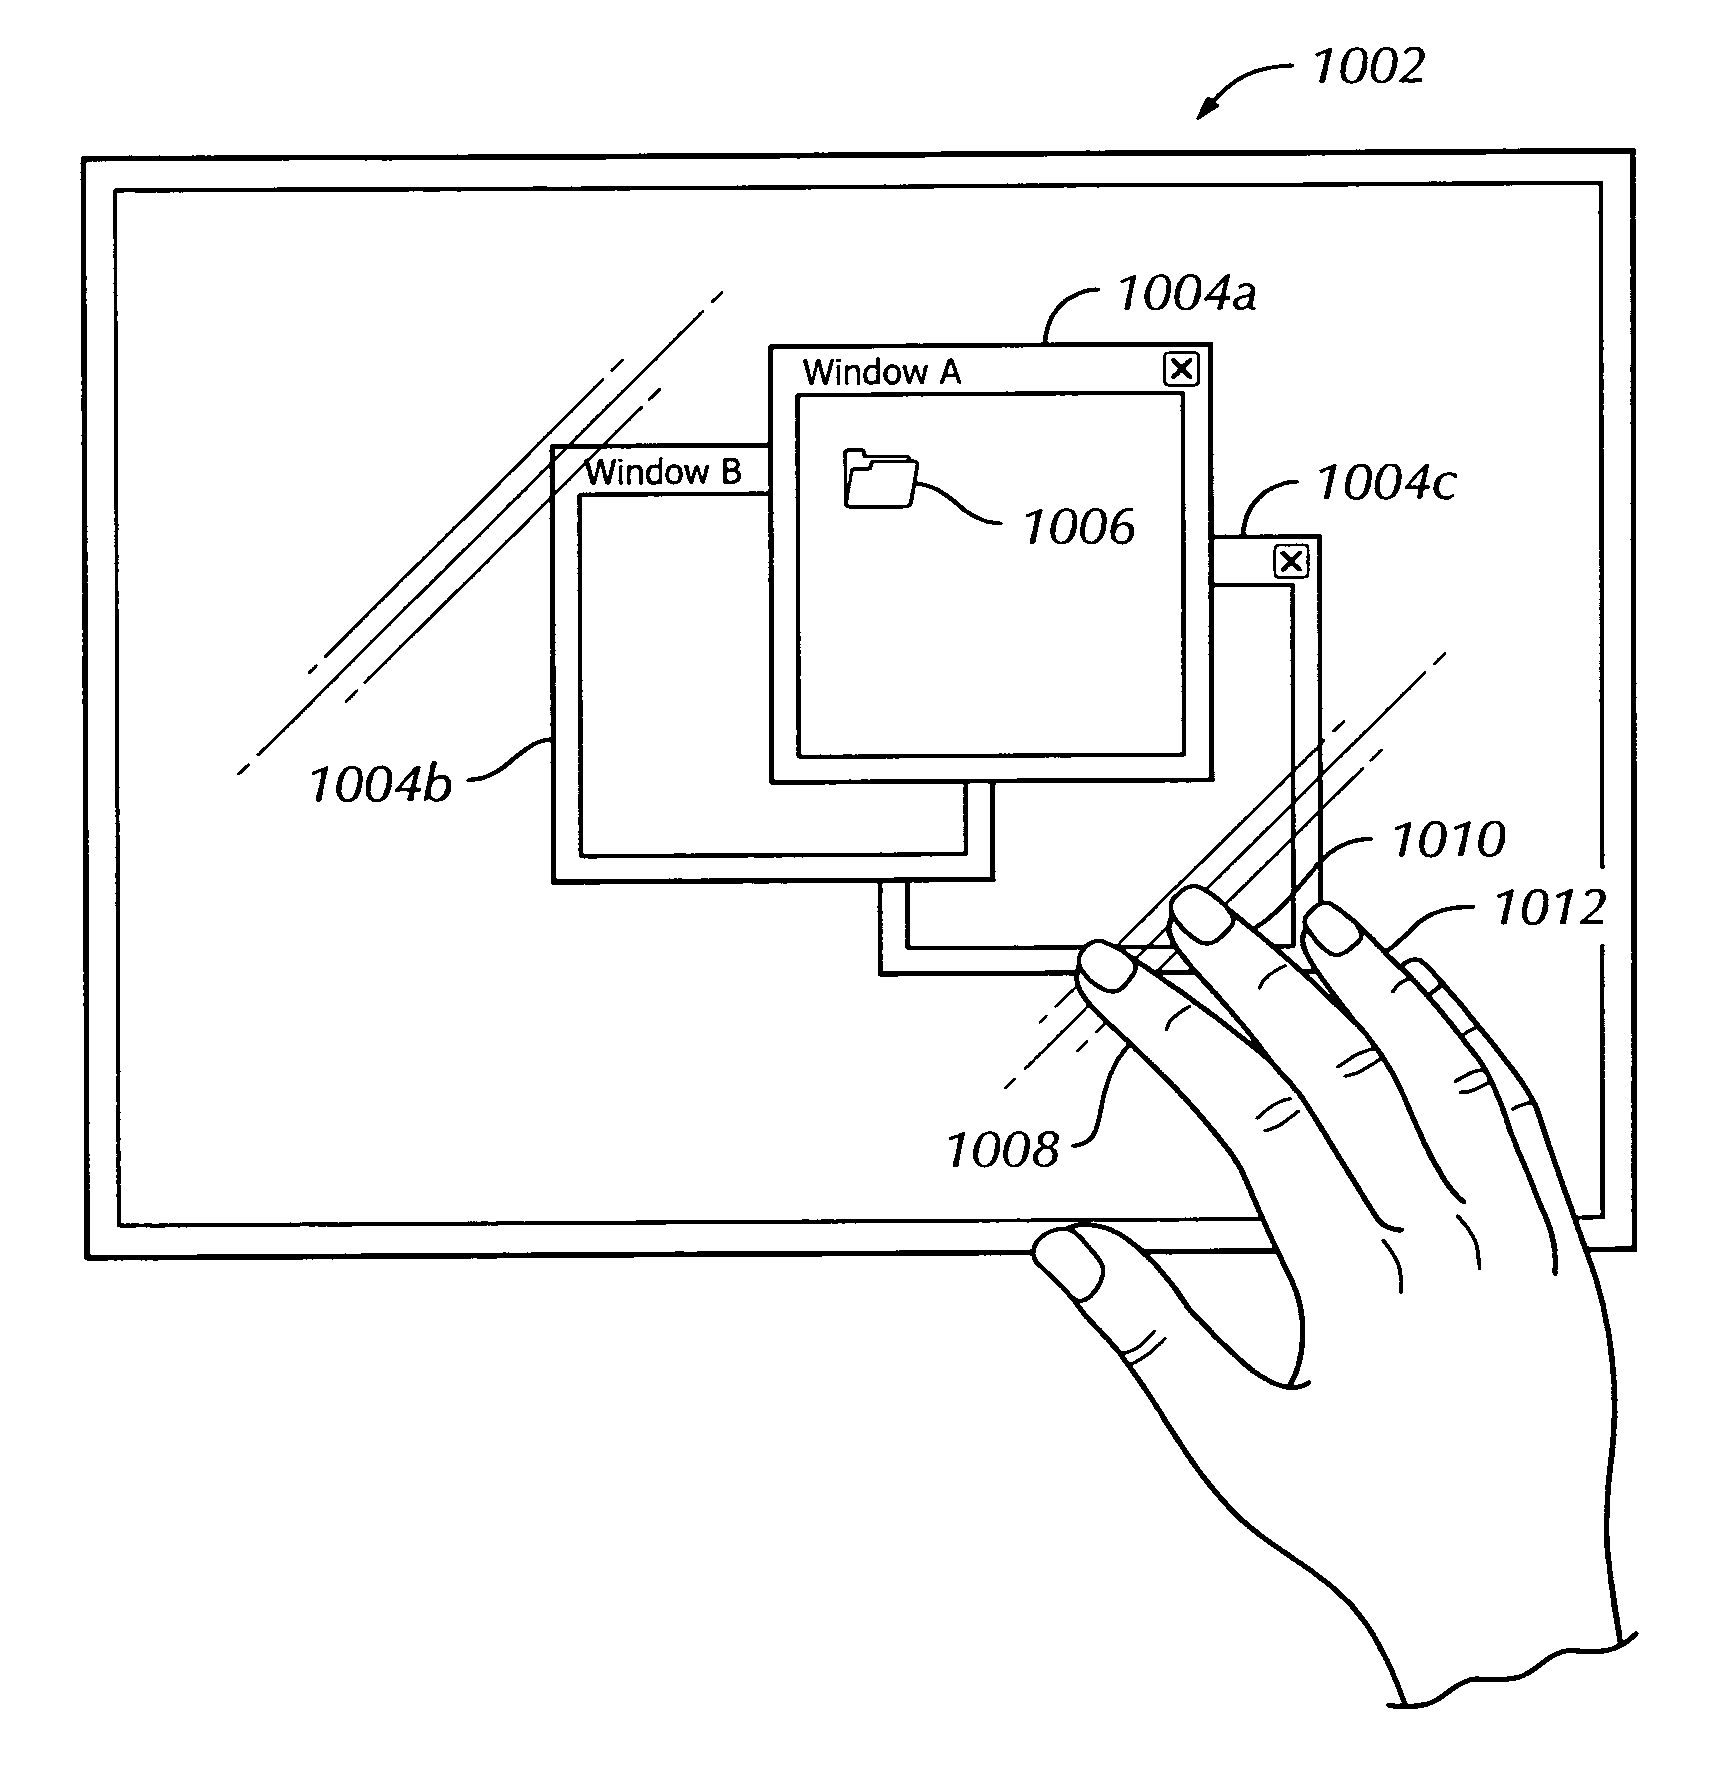 Detecting gestures on multi-event sensitive devices